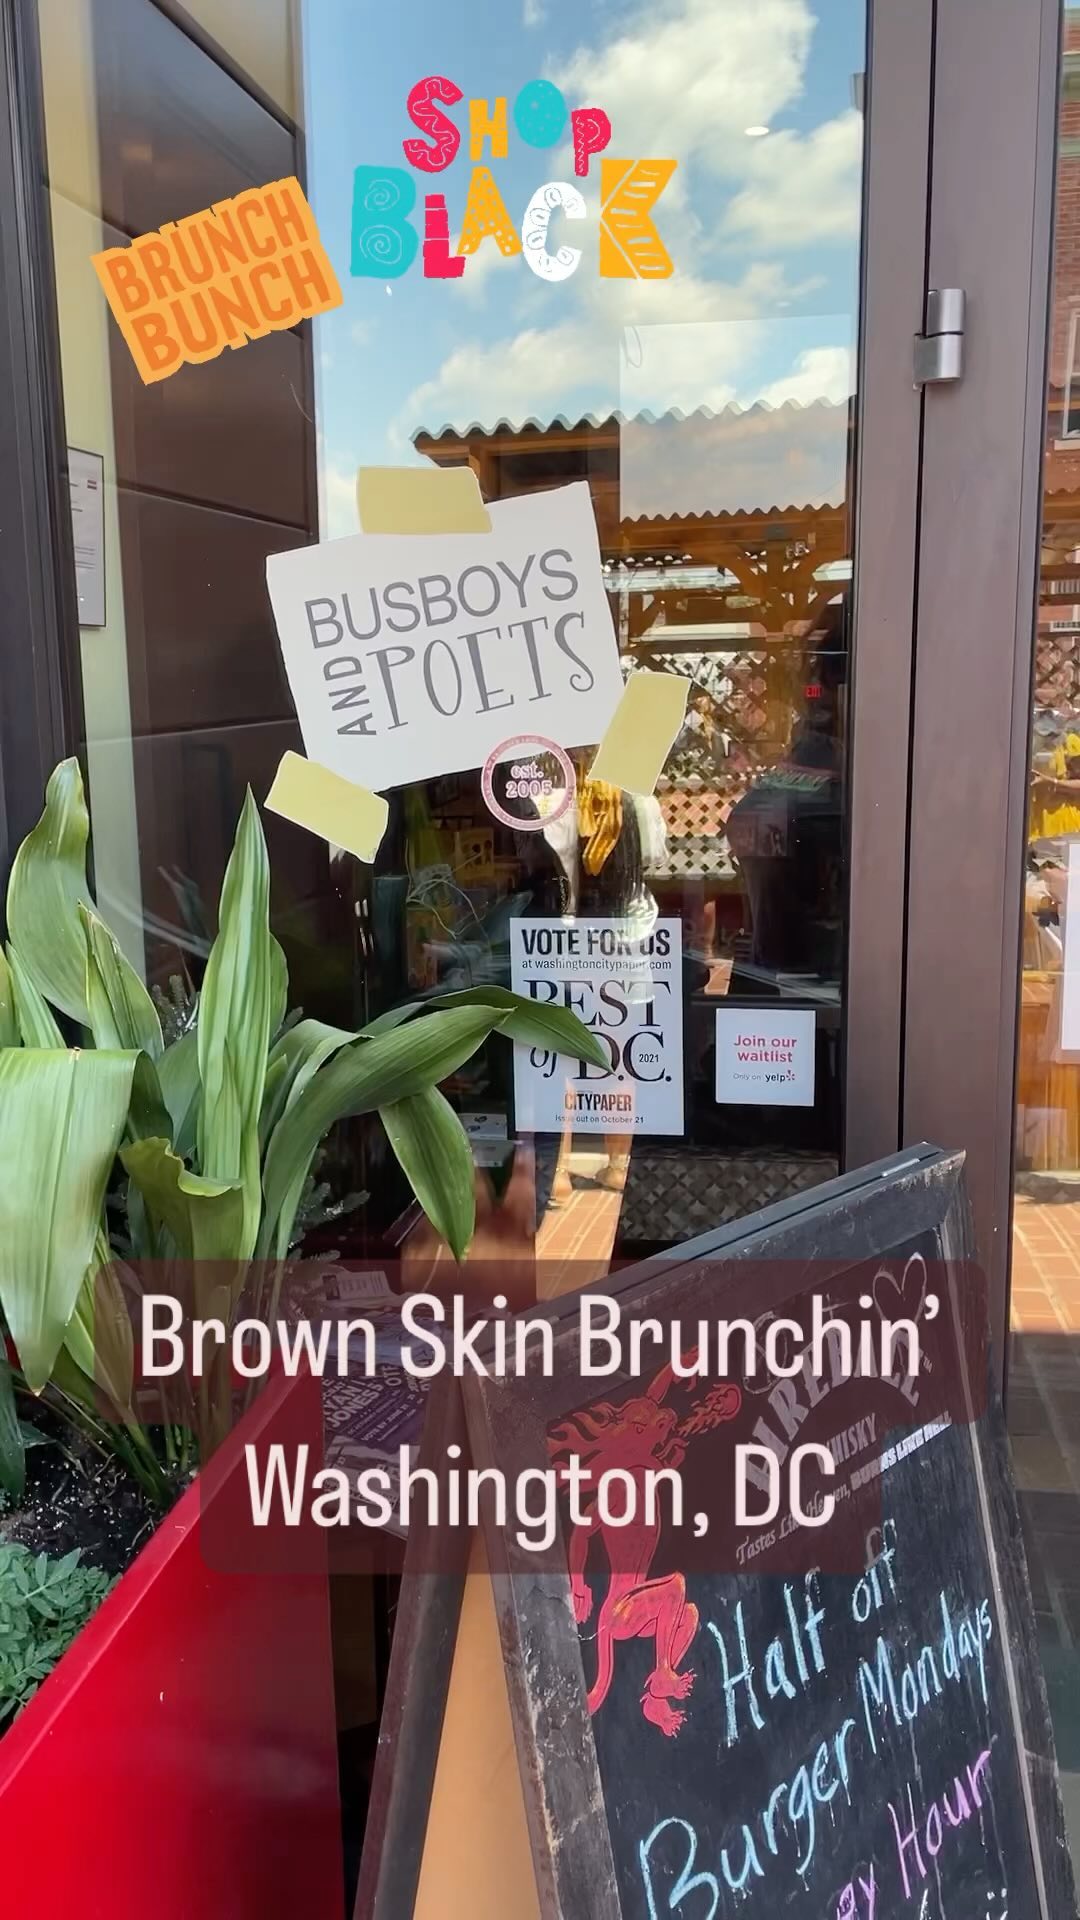 We celebrating #Juneteenth all month long! Conscious brunchin’ and shopping in #Anacostia! Shout to @busboysandpoets and @nubianhueman for the great service and making this month’s @brownskinbrunchin extra special!